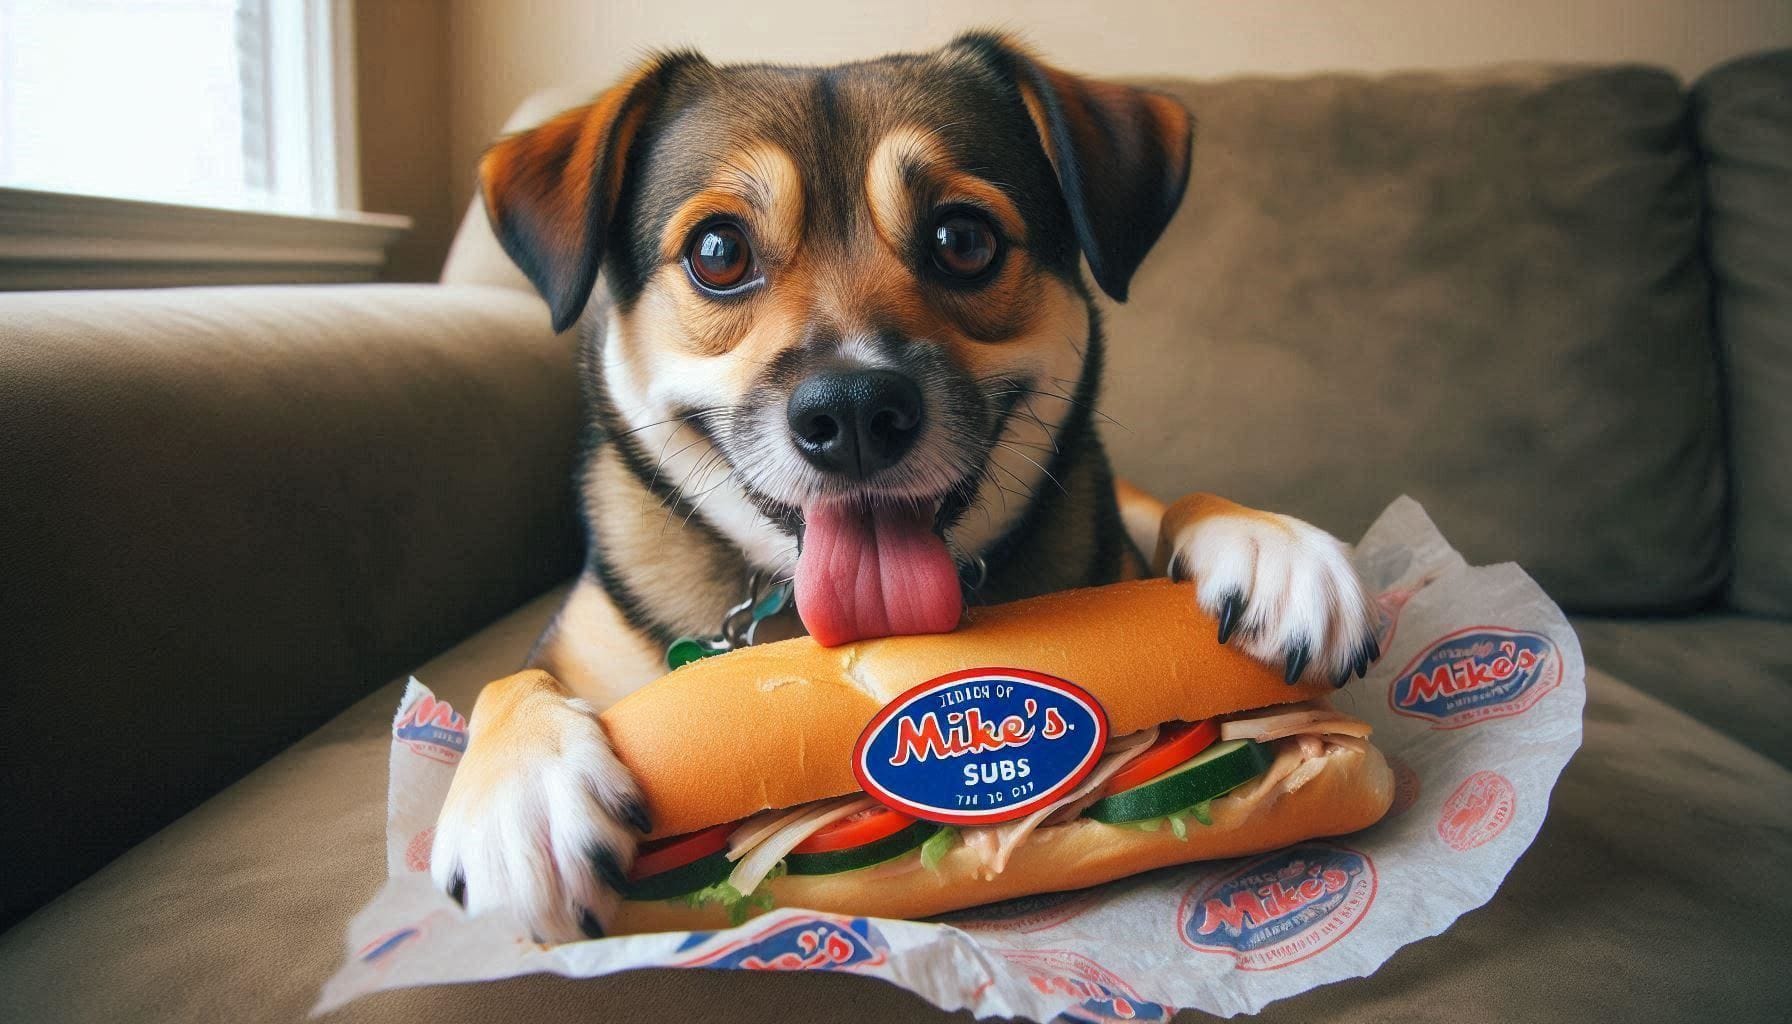 Can Dogs Eat Jersey Mike's Subs